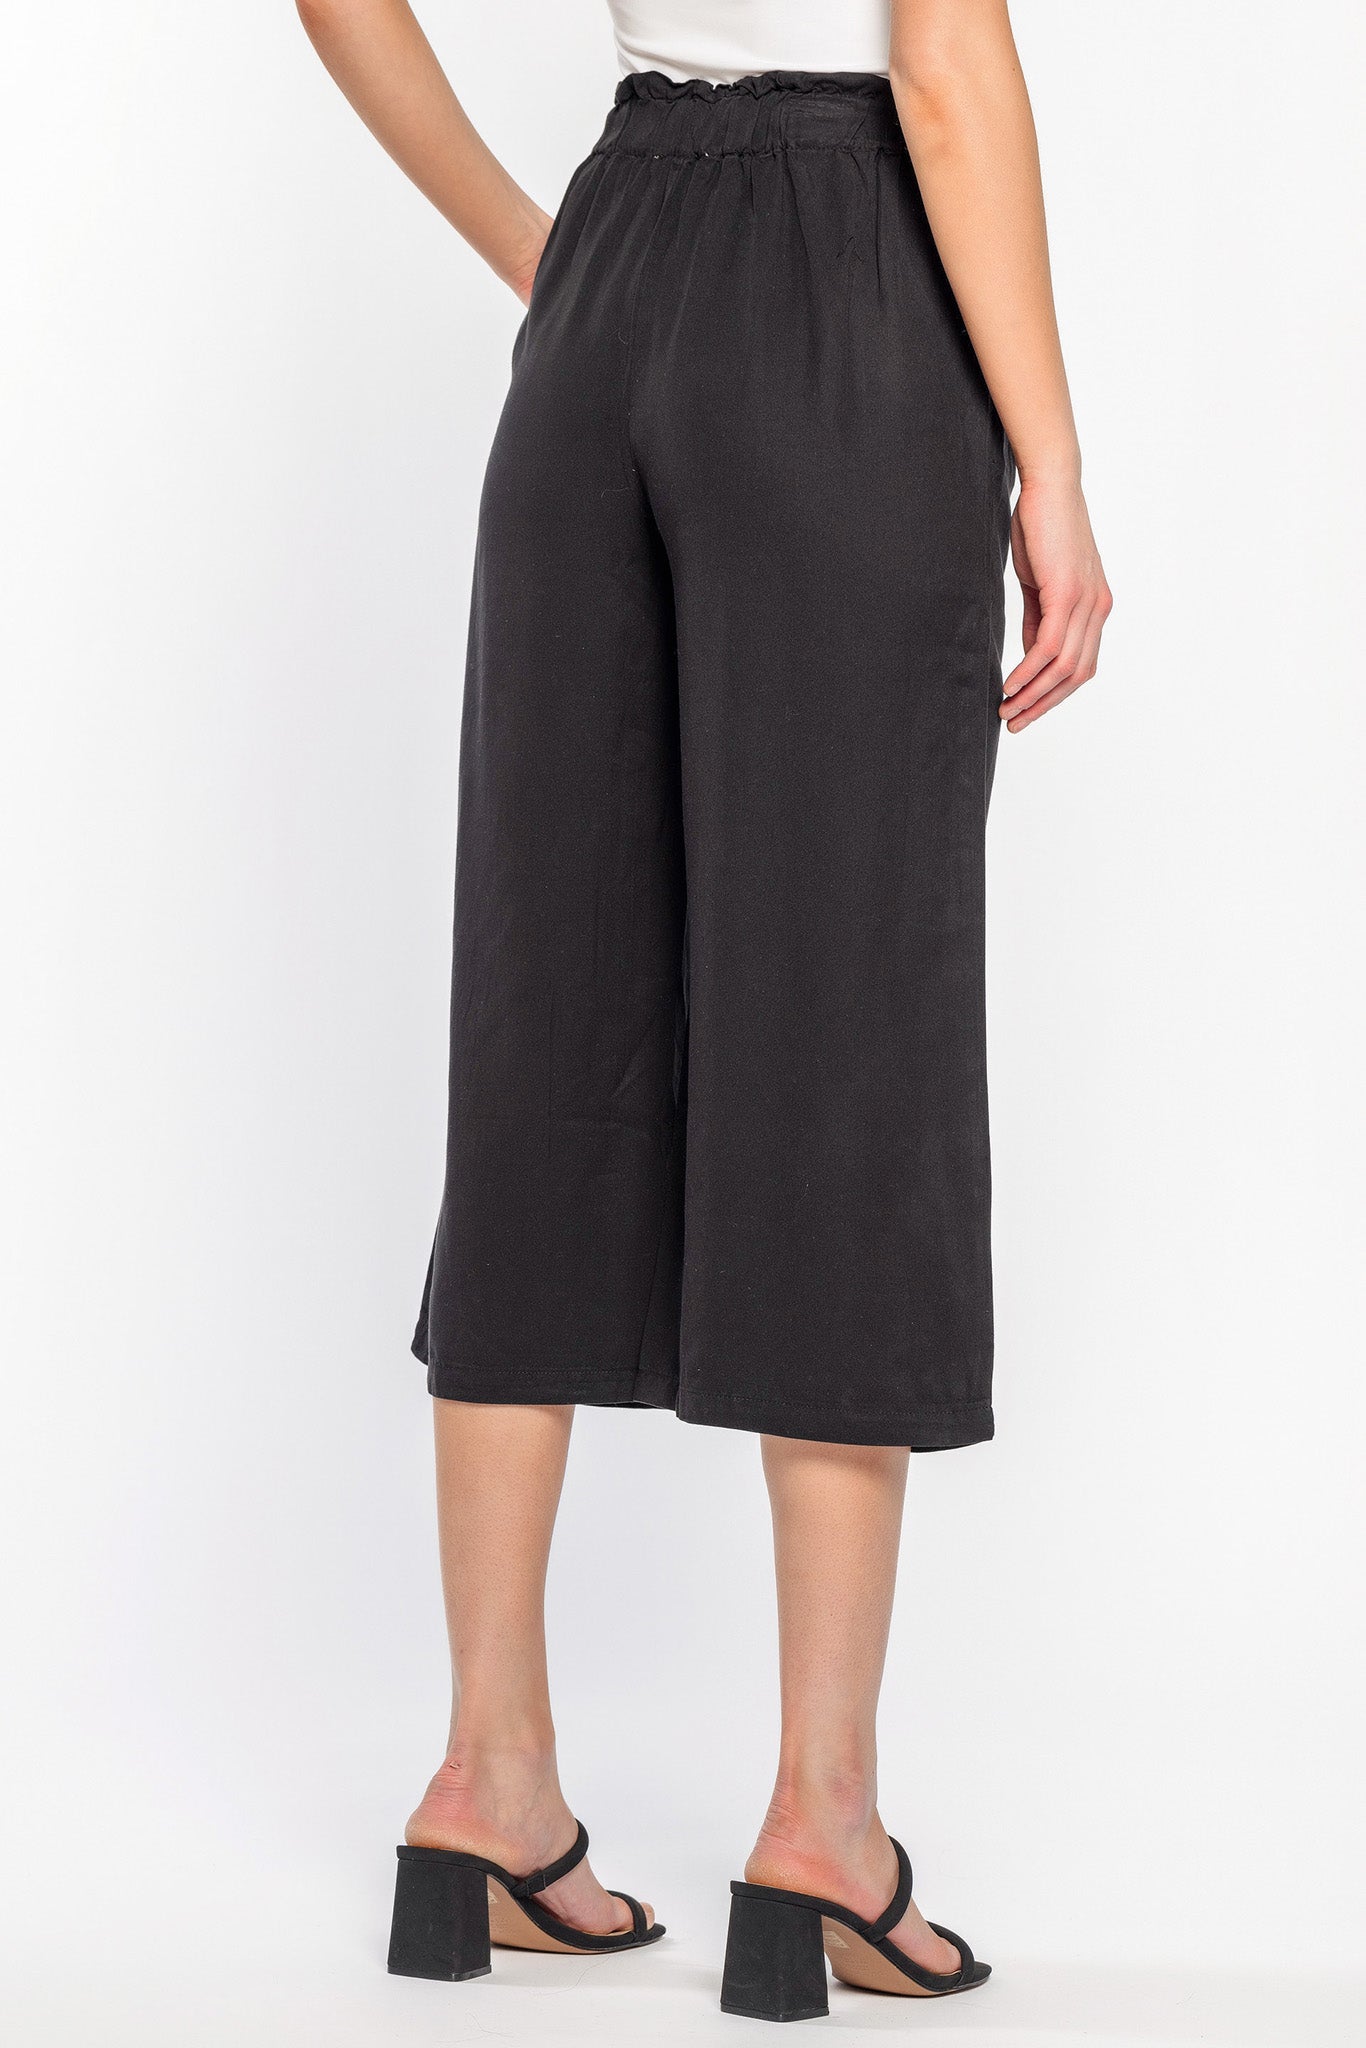 Tencel Culotte with Tie-Front